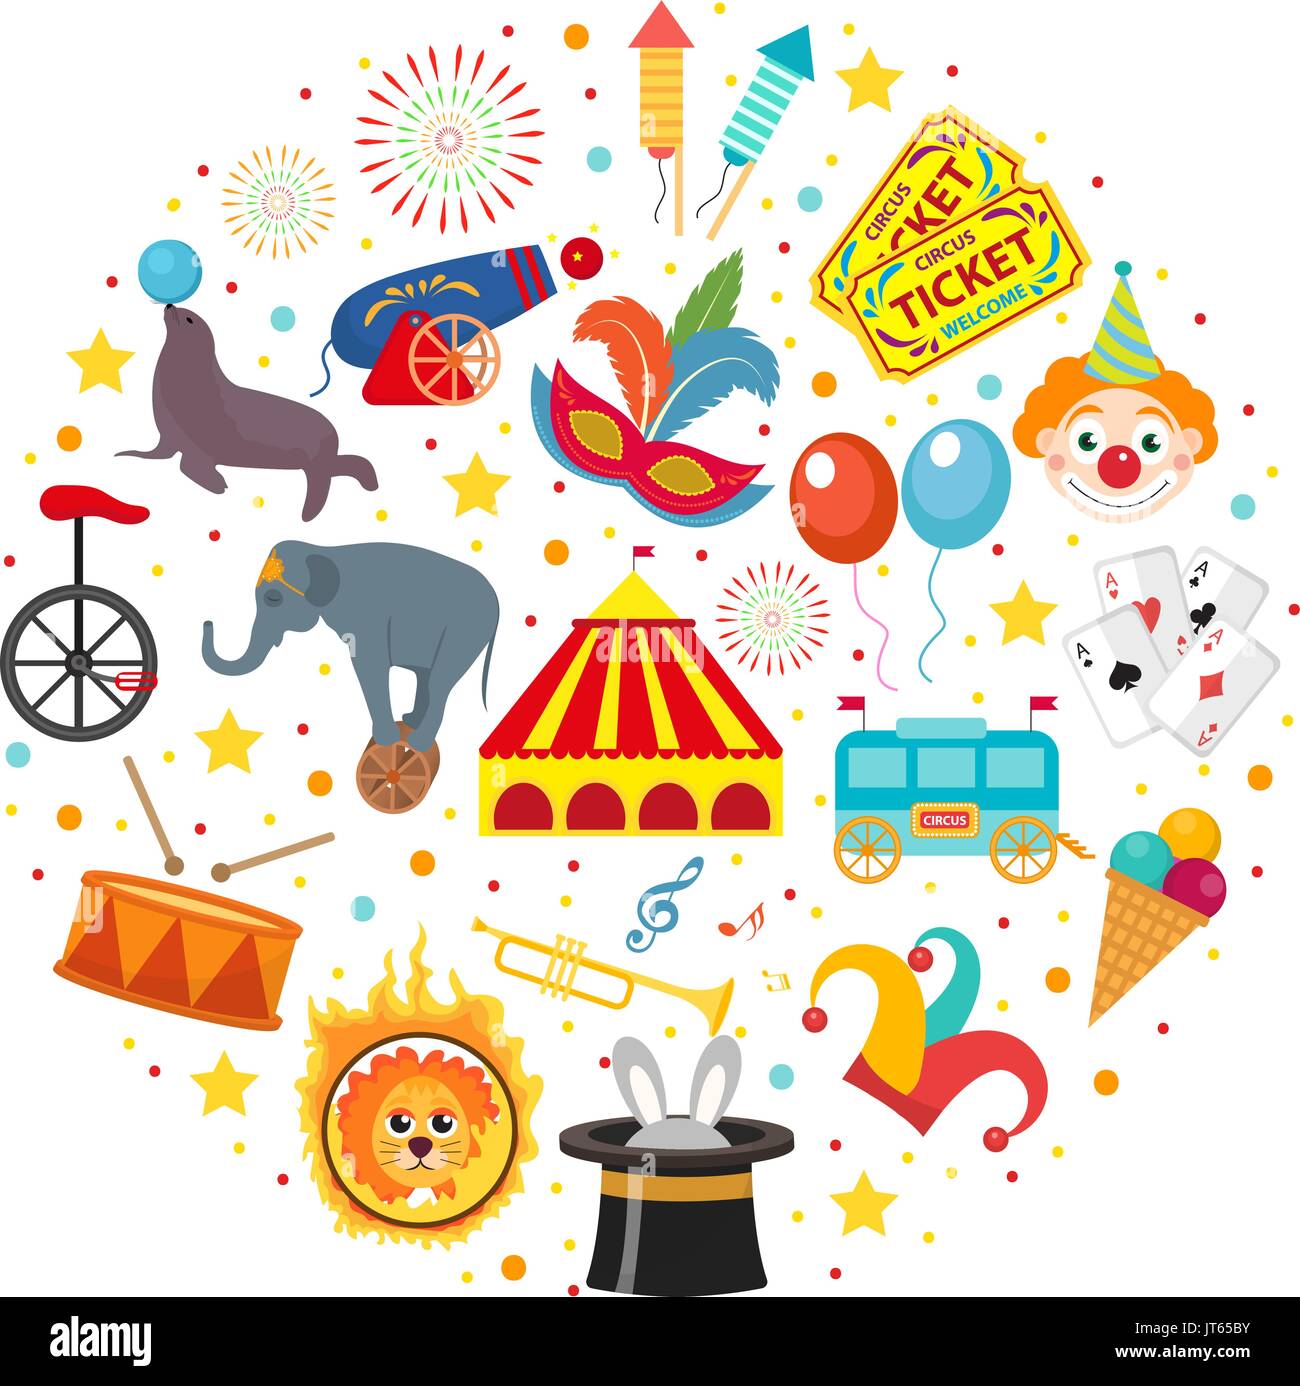 Circus icon set in round shape flat, cartoon style. Collection of elements with elephant, lion, Sealion, gun, clown, tickets. Isolated on white backgr Stock Vector